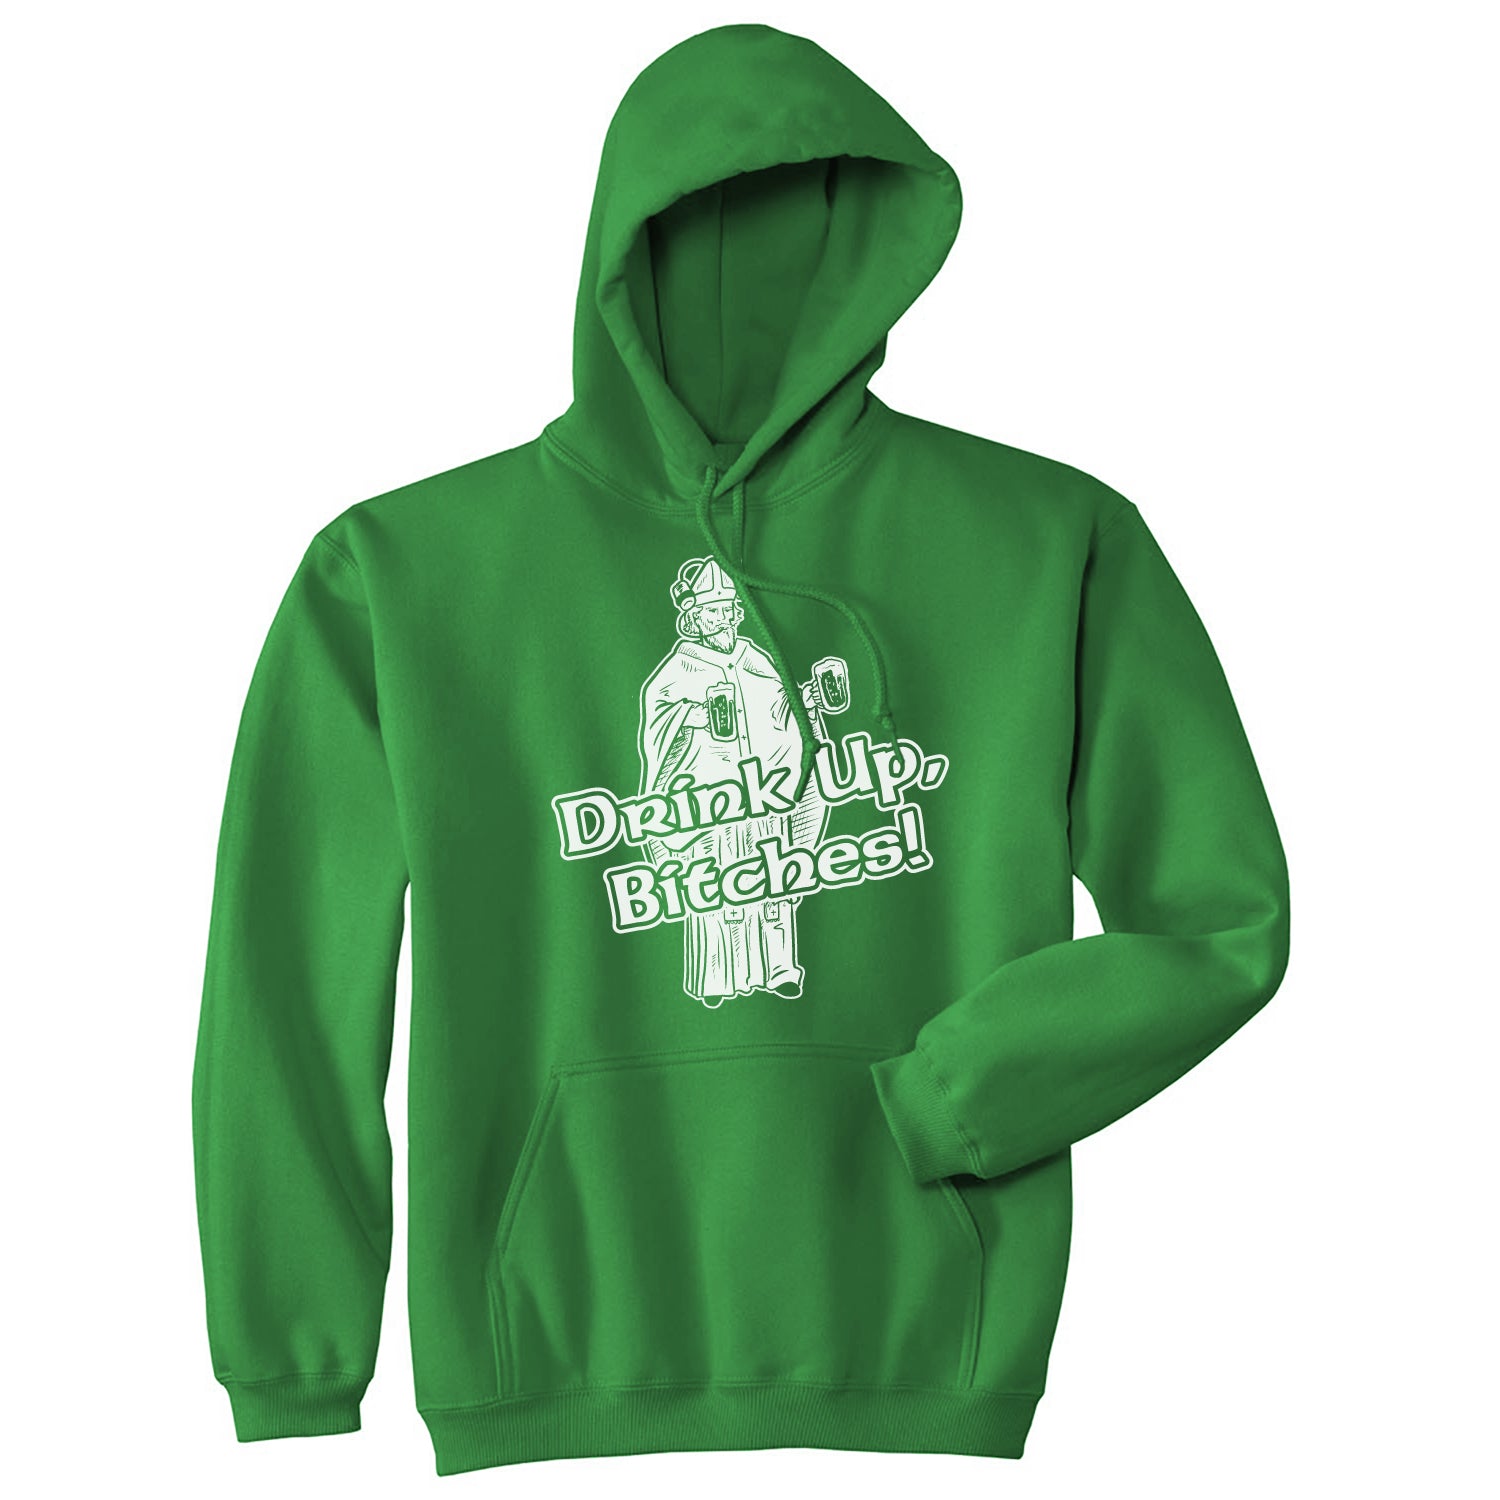 Funny Green Drink Up Bitches Hoodie Nerdy Saint Patrick's Day Drinking Tee